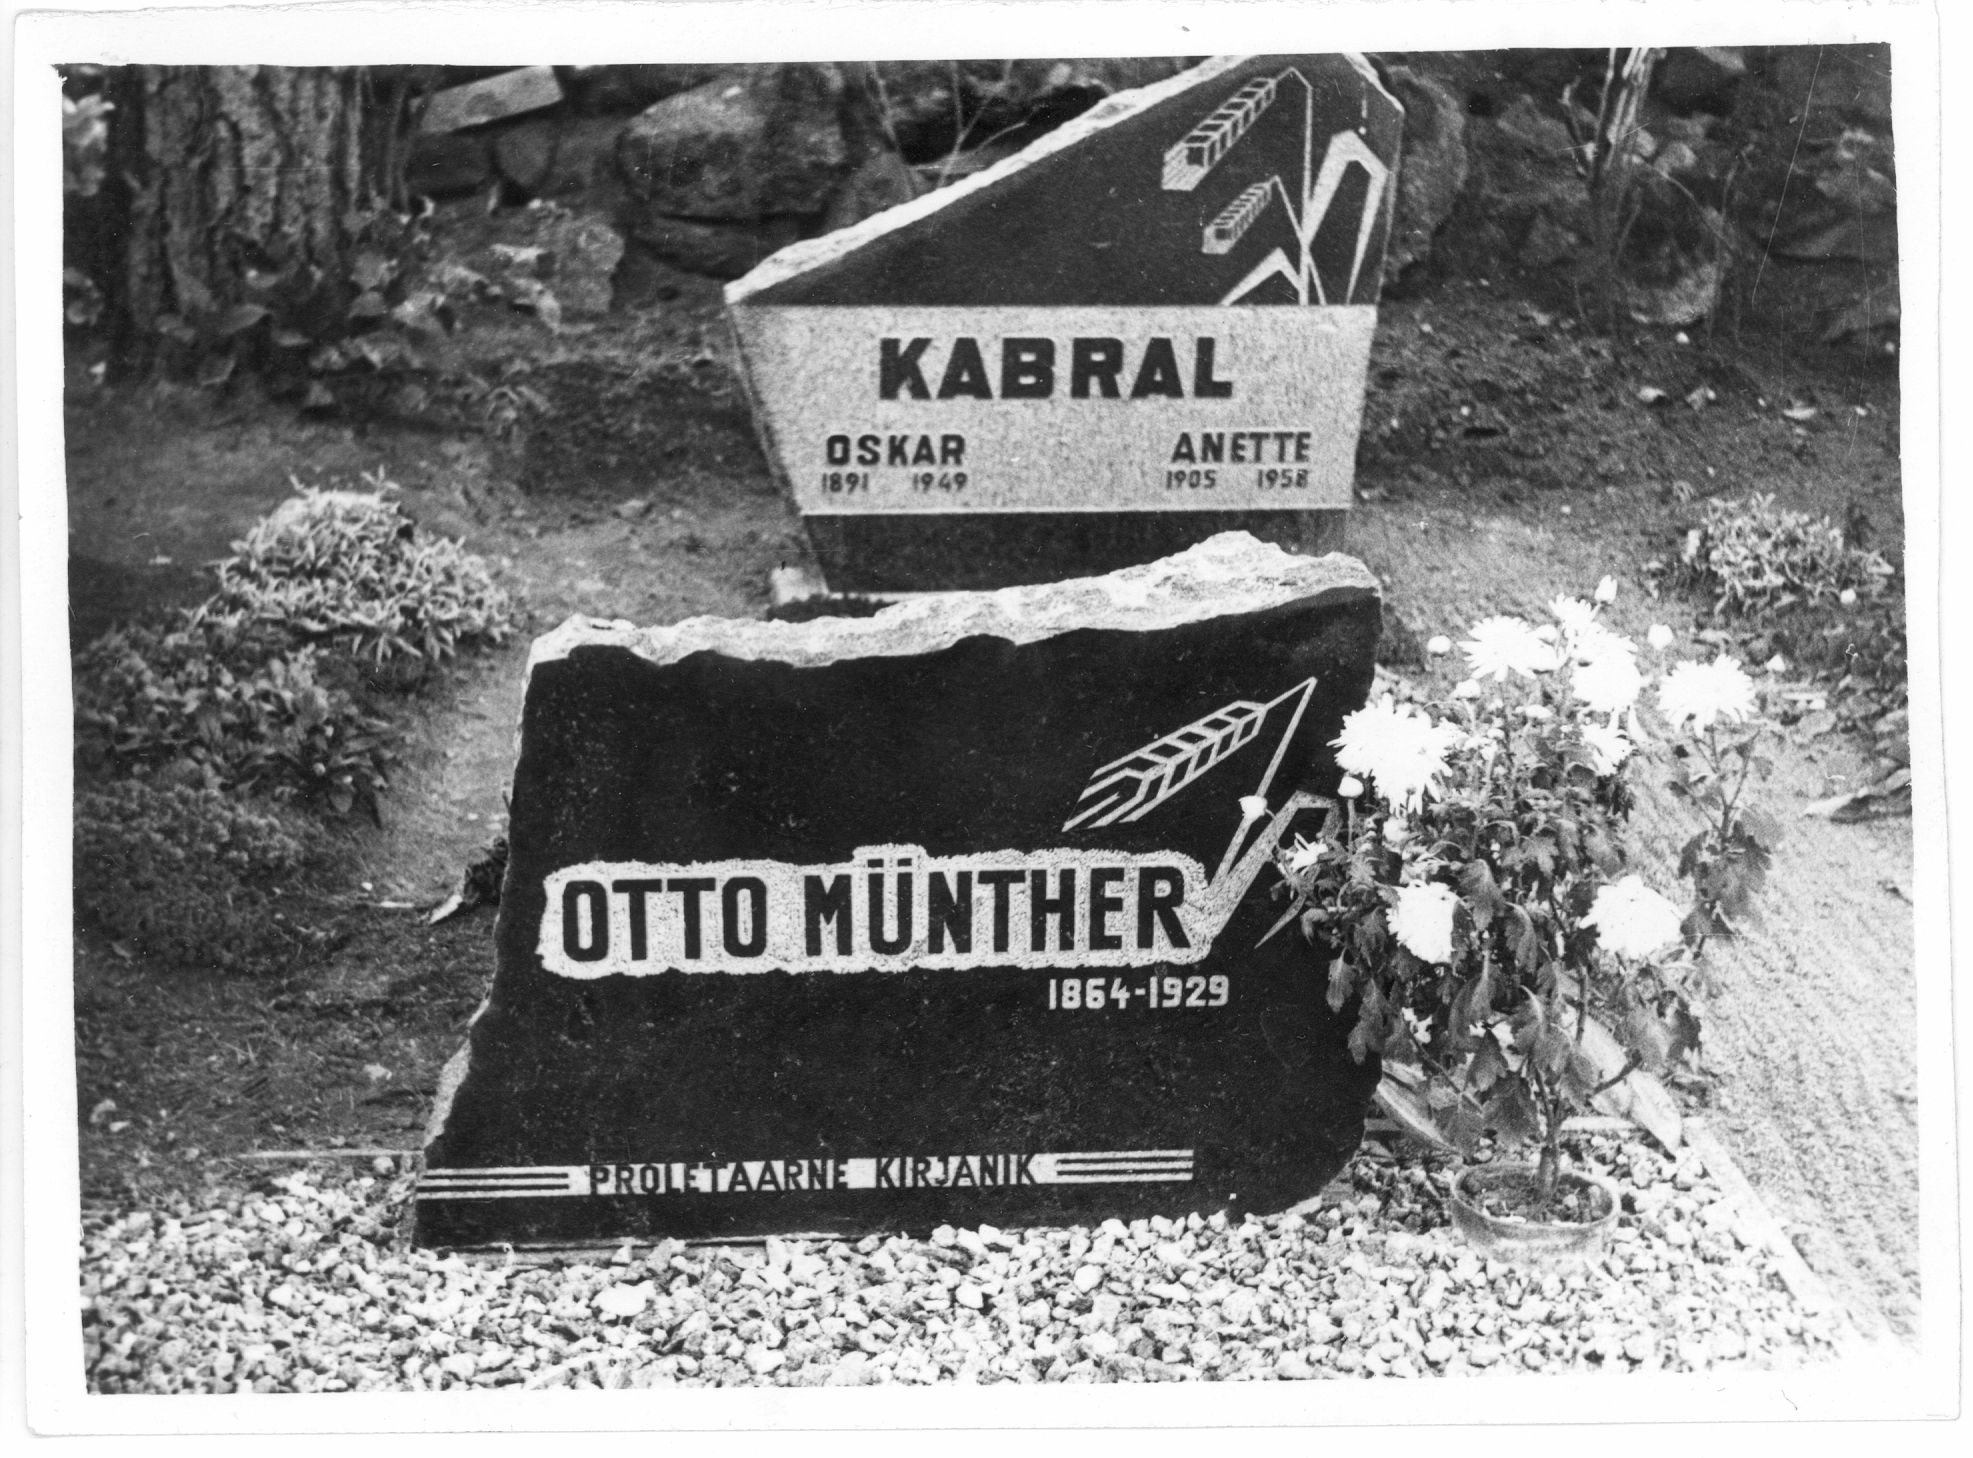 Otto Münther i, Oskar and Anette gravestones in the Uudeküla cemetery